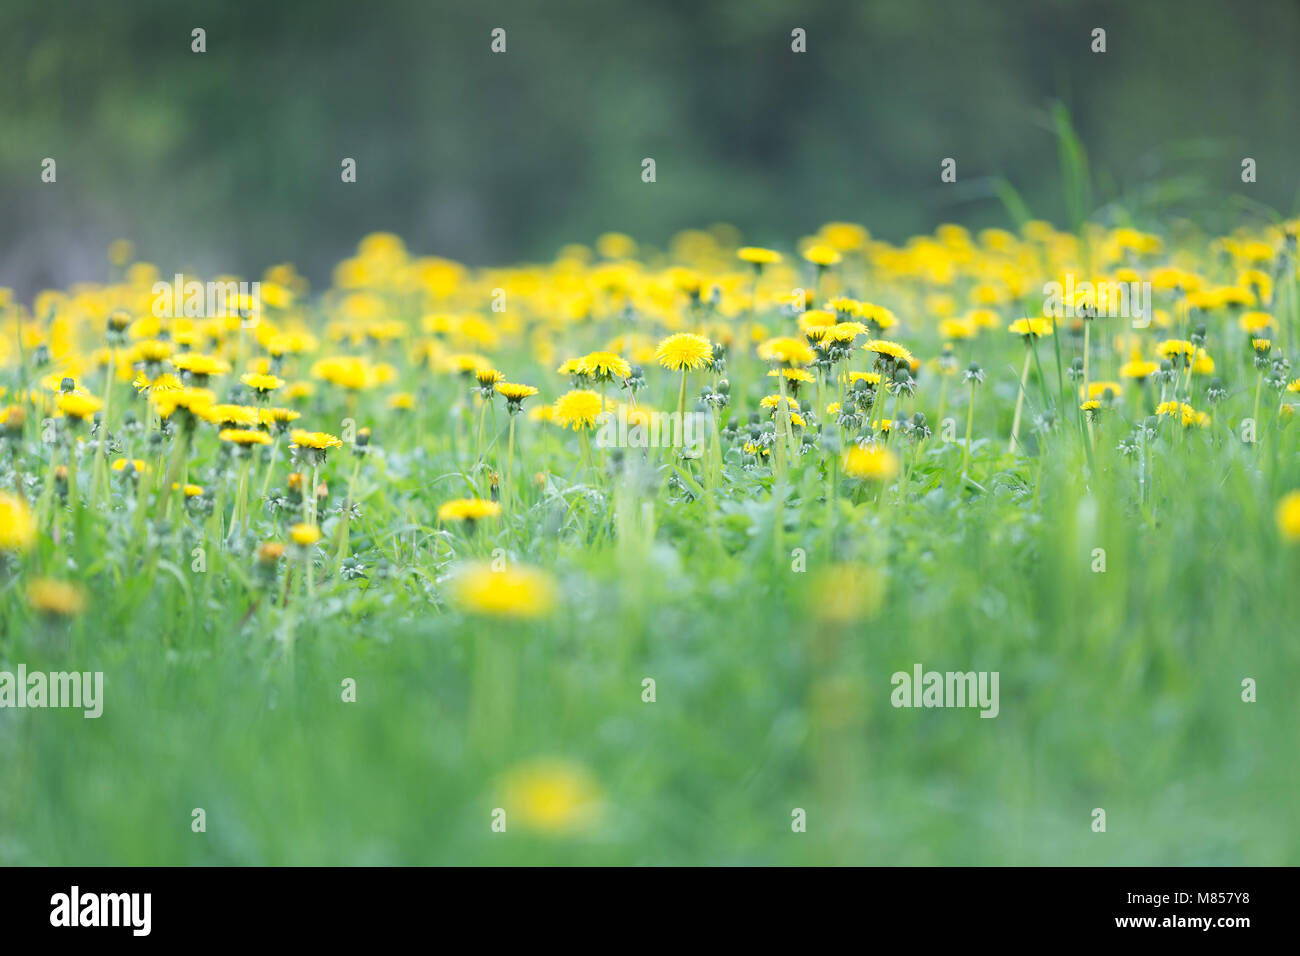 Spring meadow with yellow blooming dandelions Stock Photo